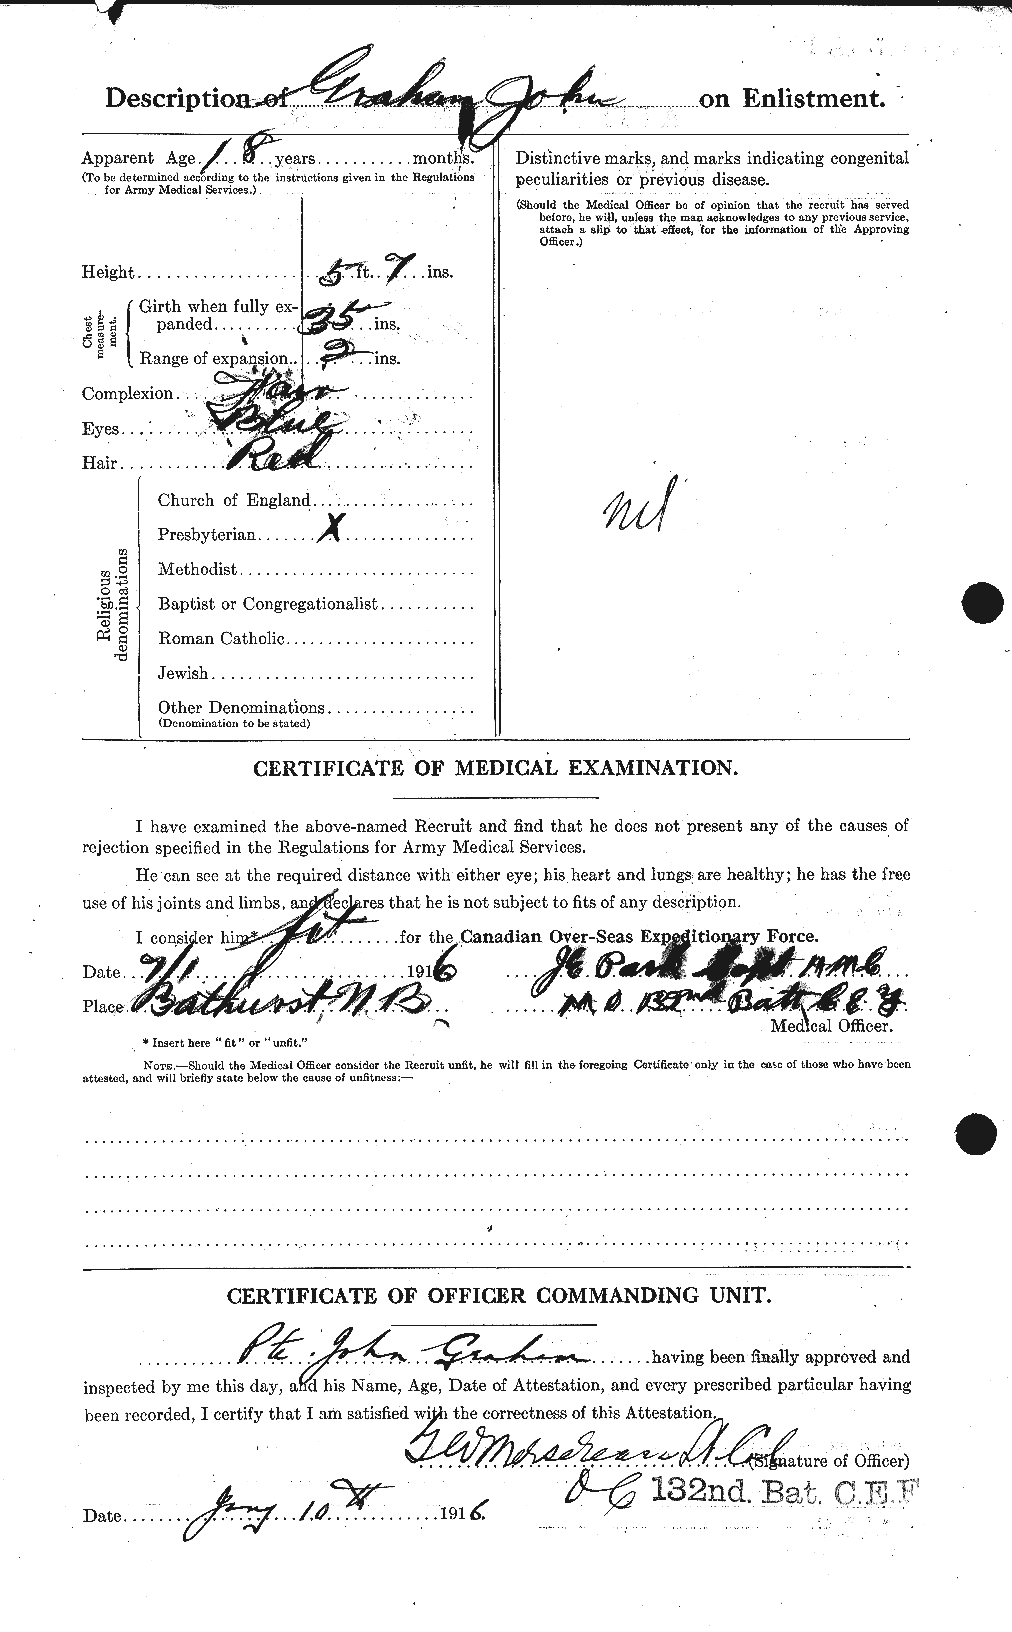 Personnel Records of the First World War - CEF 359136b